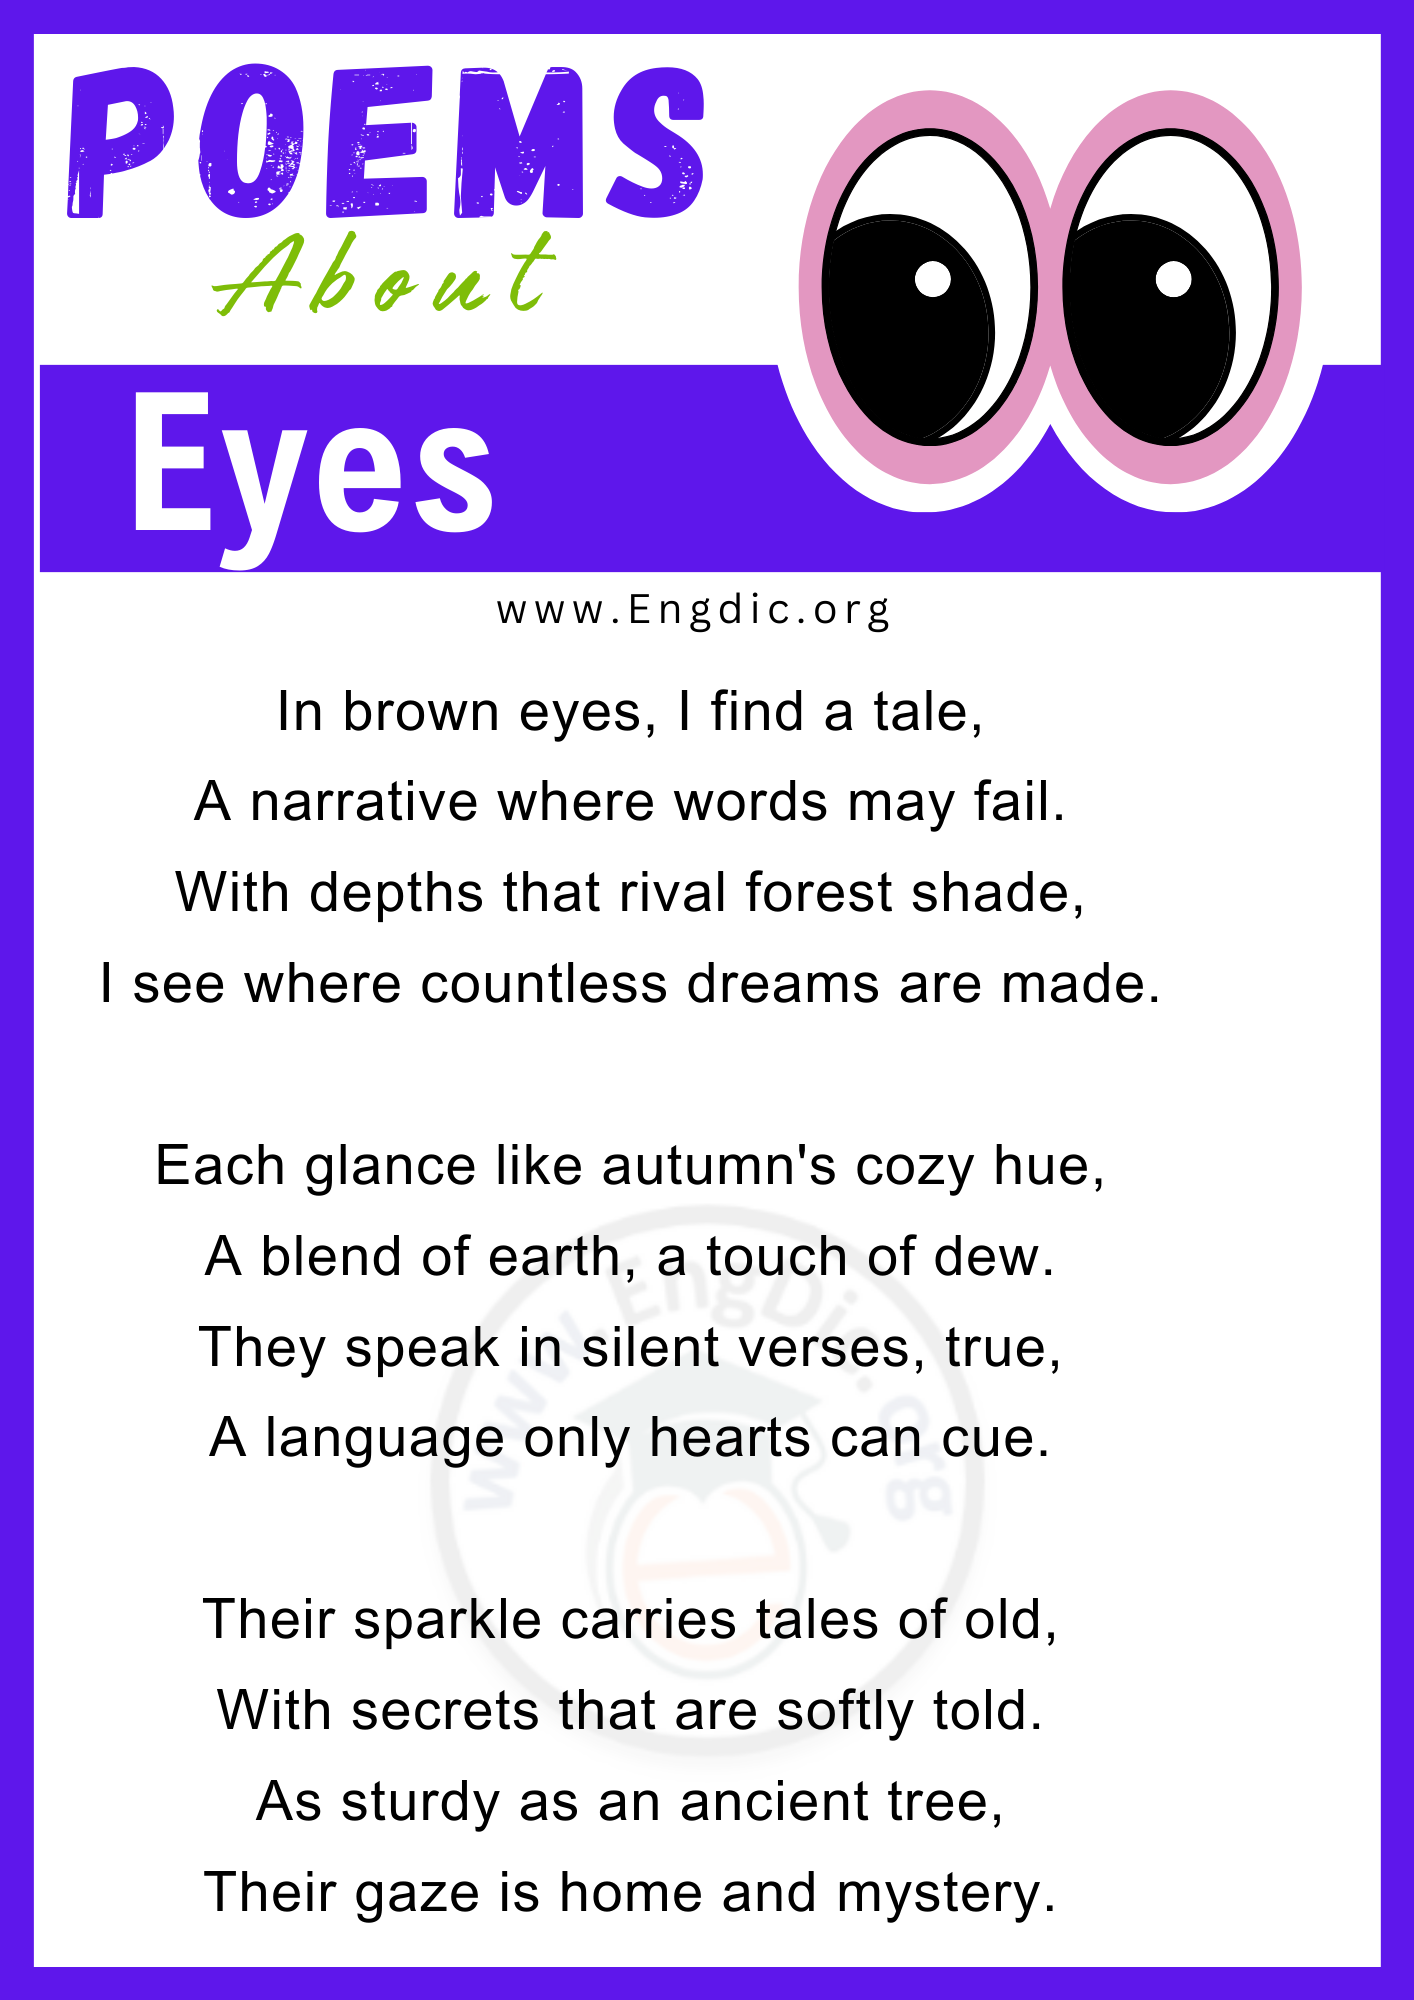 20+ Poems about Eyes (Brown, Blue, & Green Beautiful Eyes) – EngDic